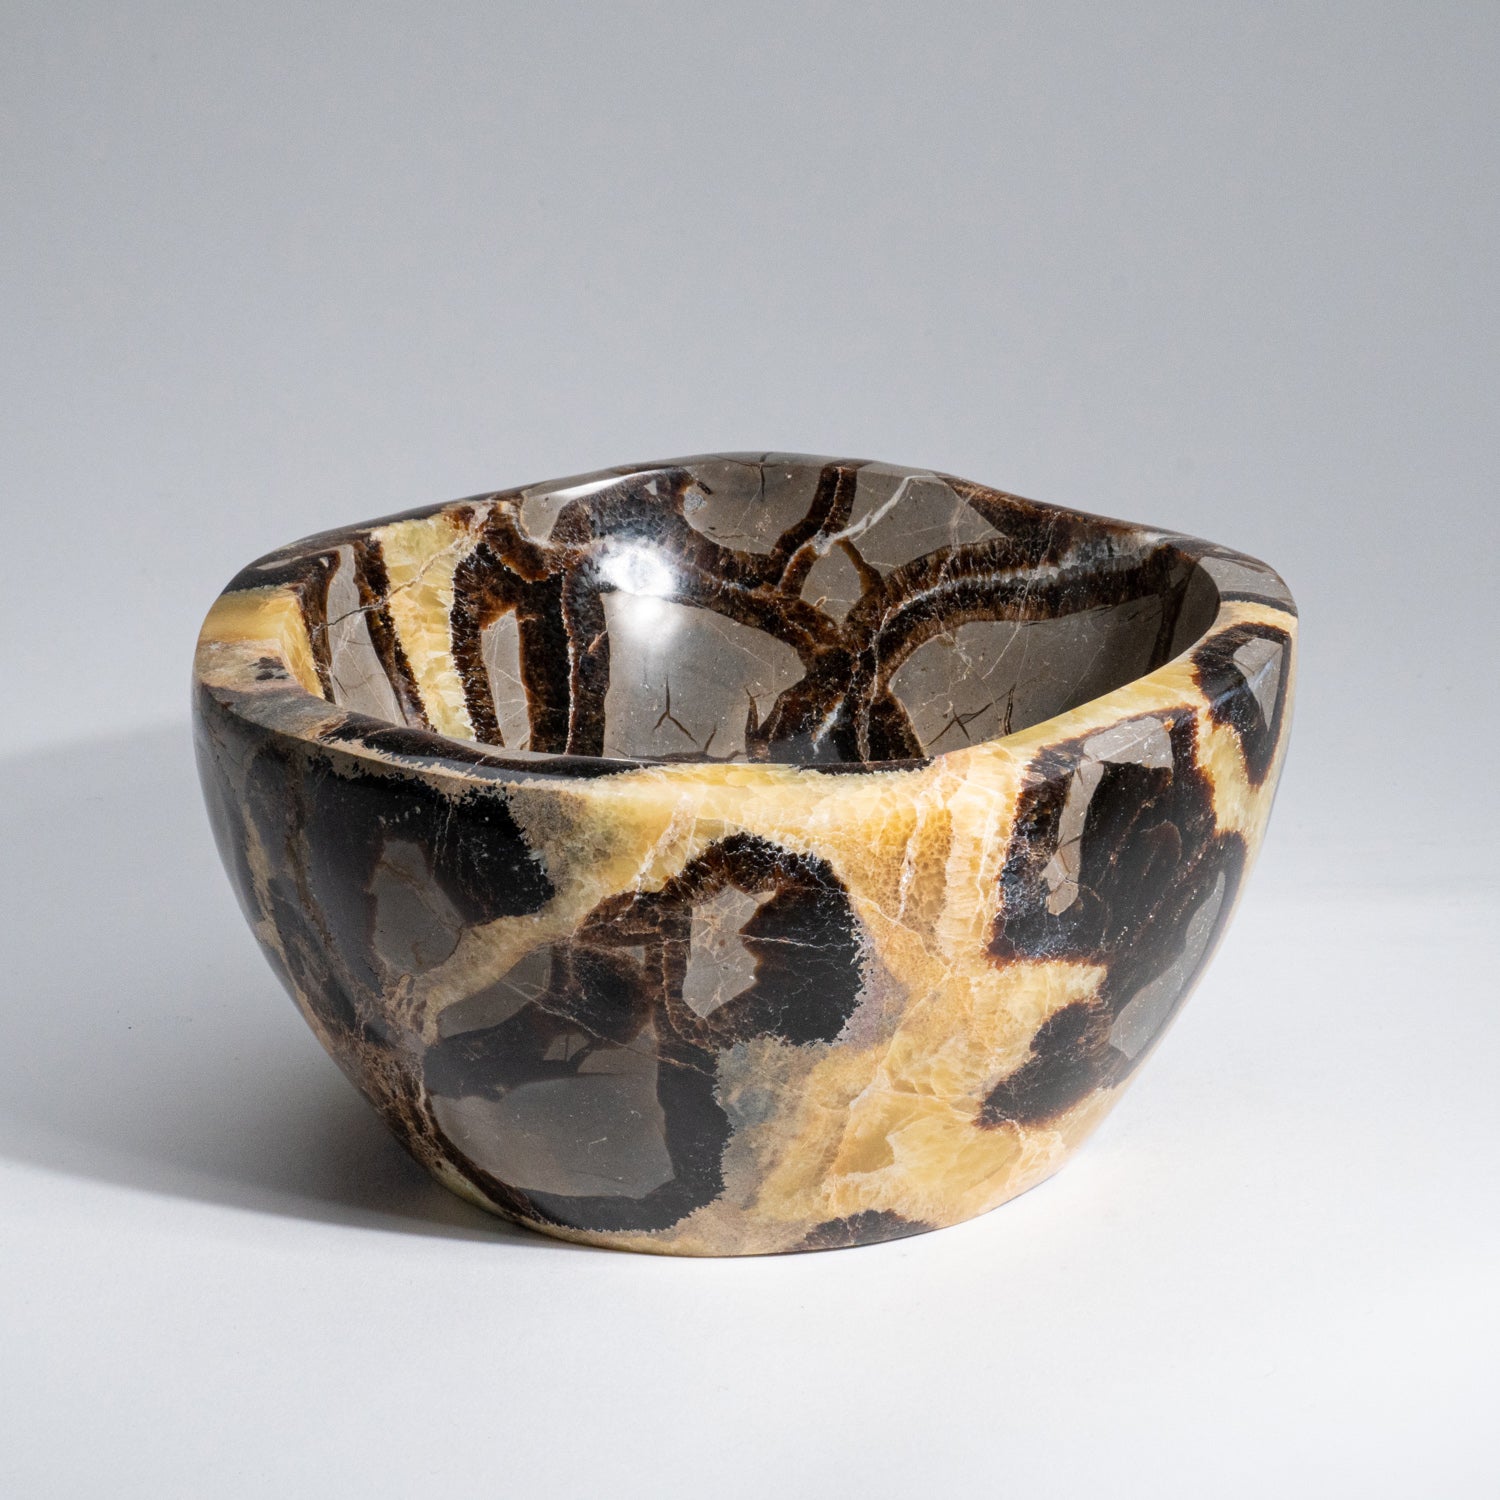 Genuine Polished Septarian Bowl from Madagascar (4 lbs)